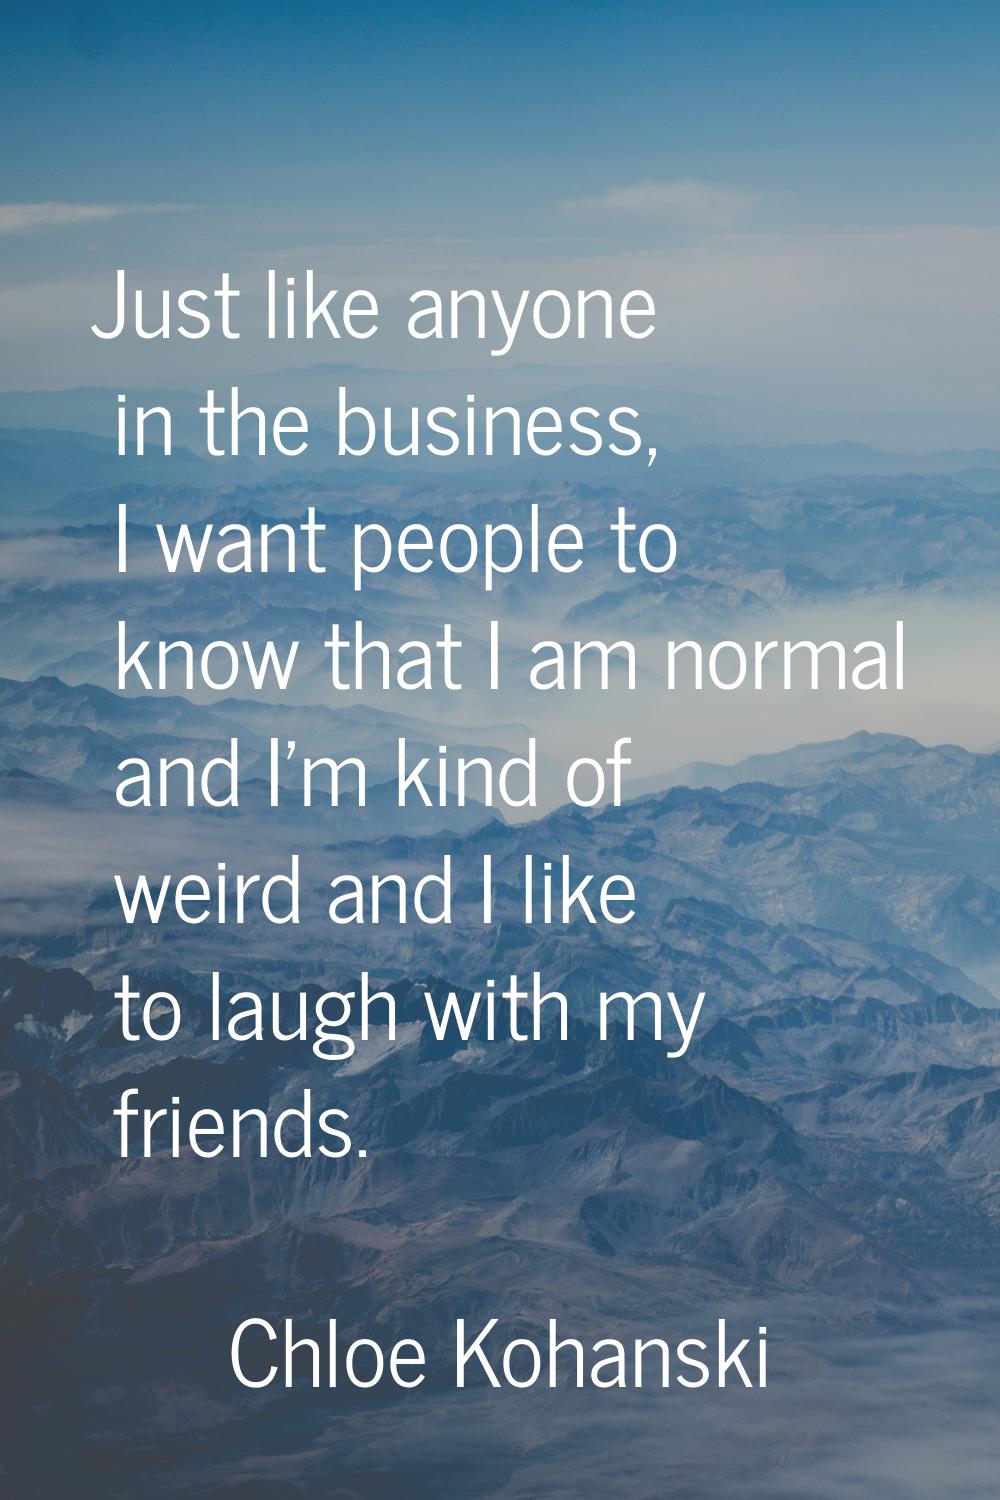 Just like anyone in the business, I want people to know that I am normal and I'm kind of weird and 